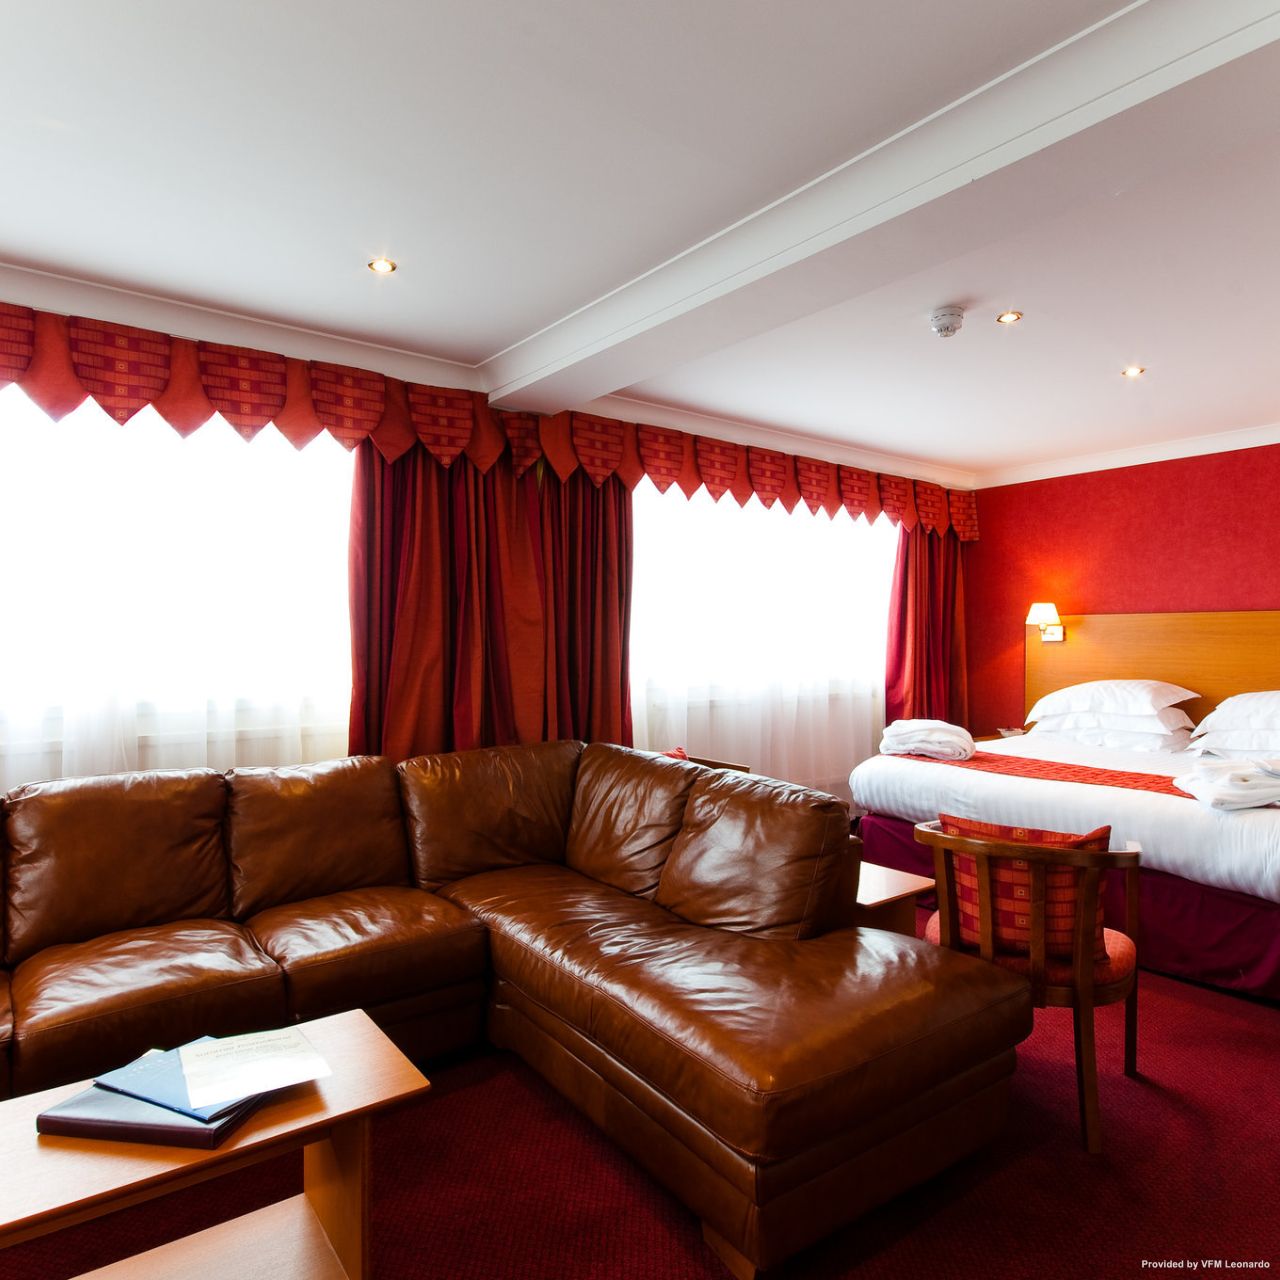 The Liner Hotel - Liverpool - Great prices at HOTEL INFO